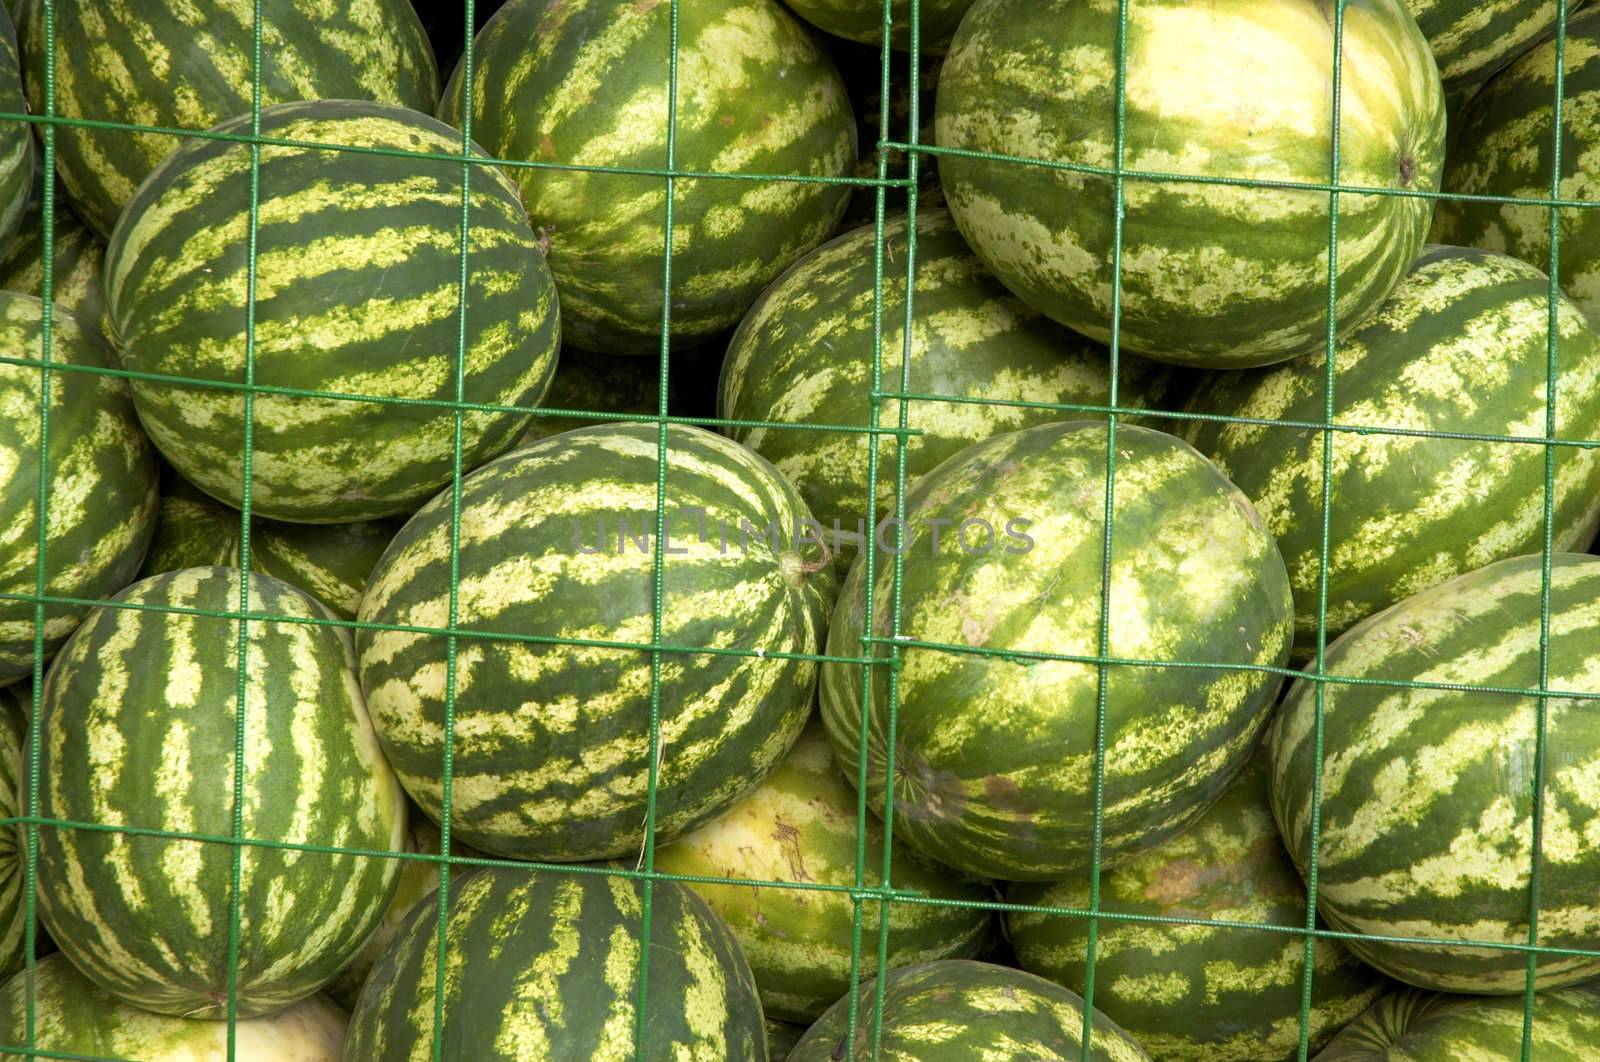 water-melons